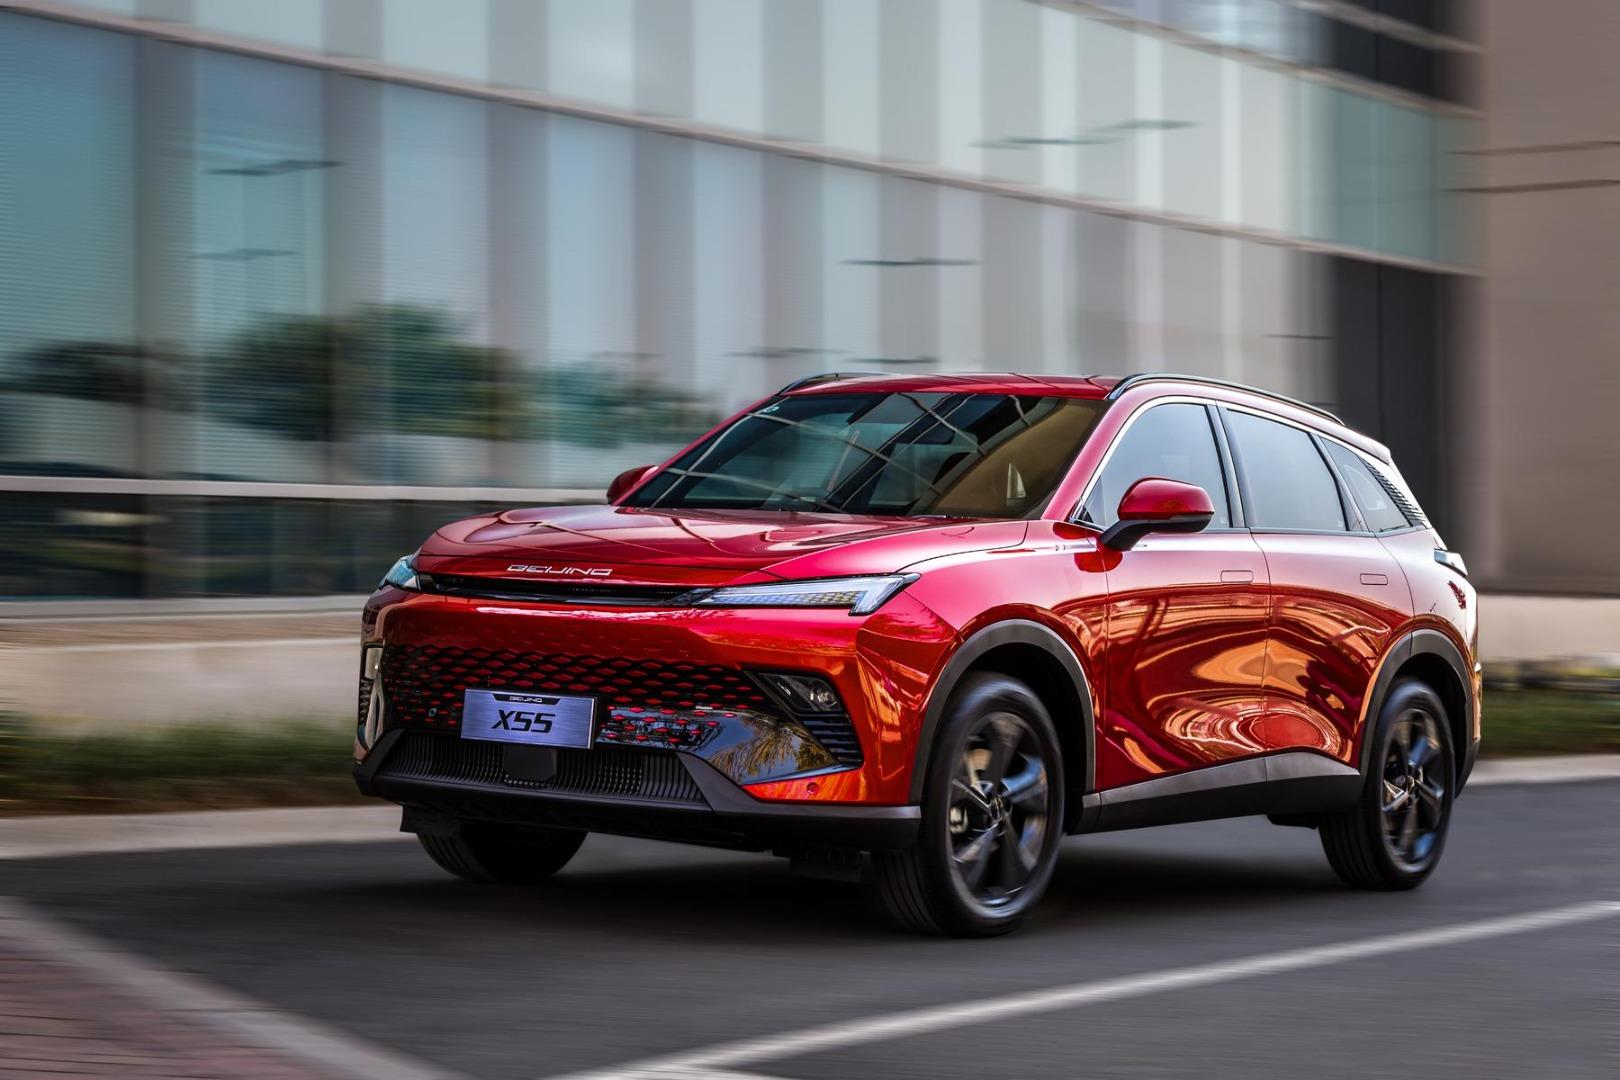 does the baic beijing x55 come in automatic?